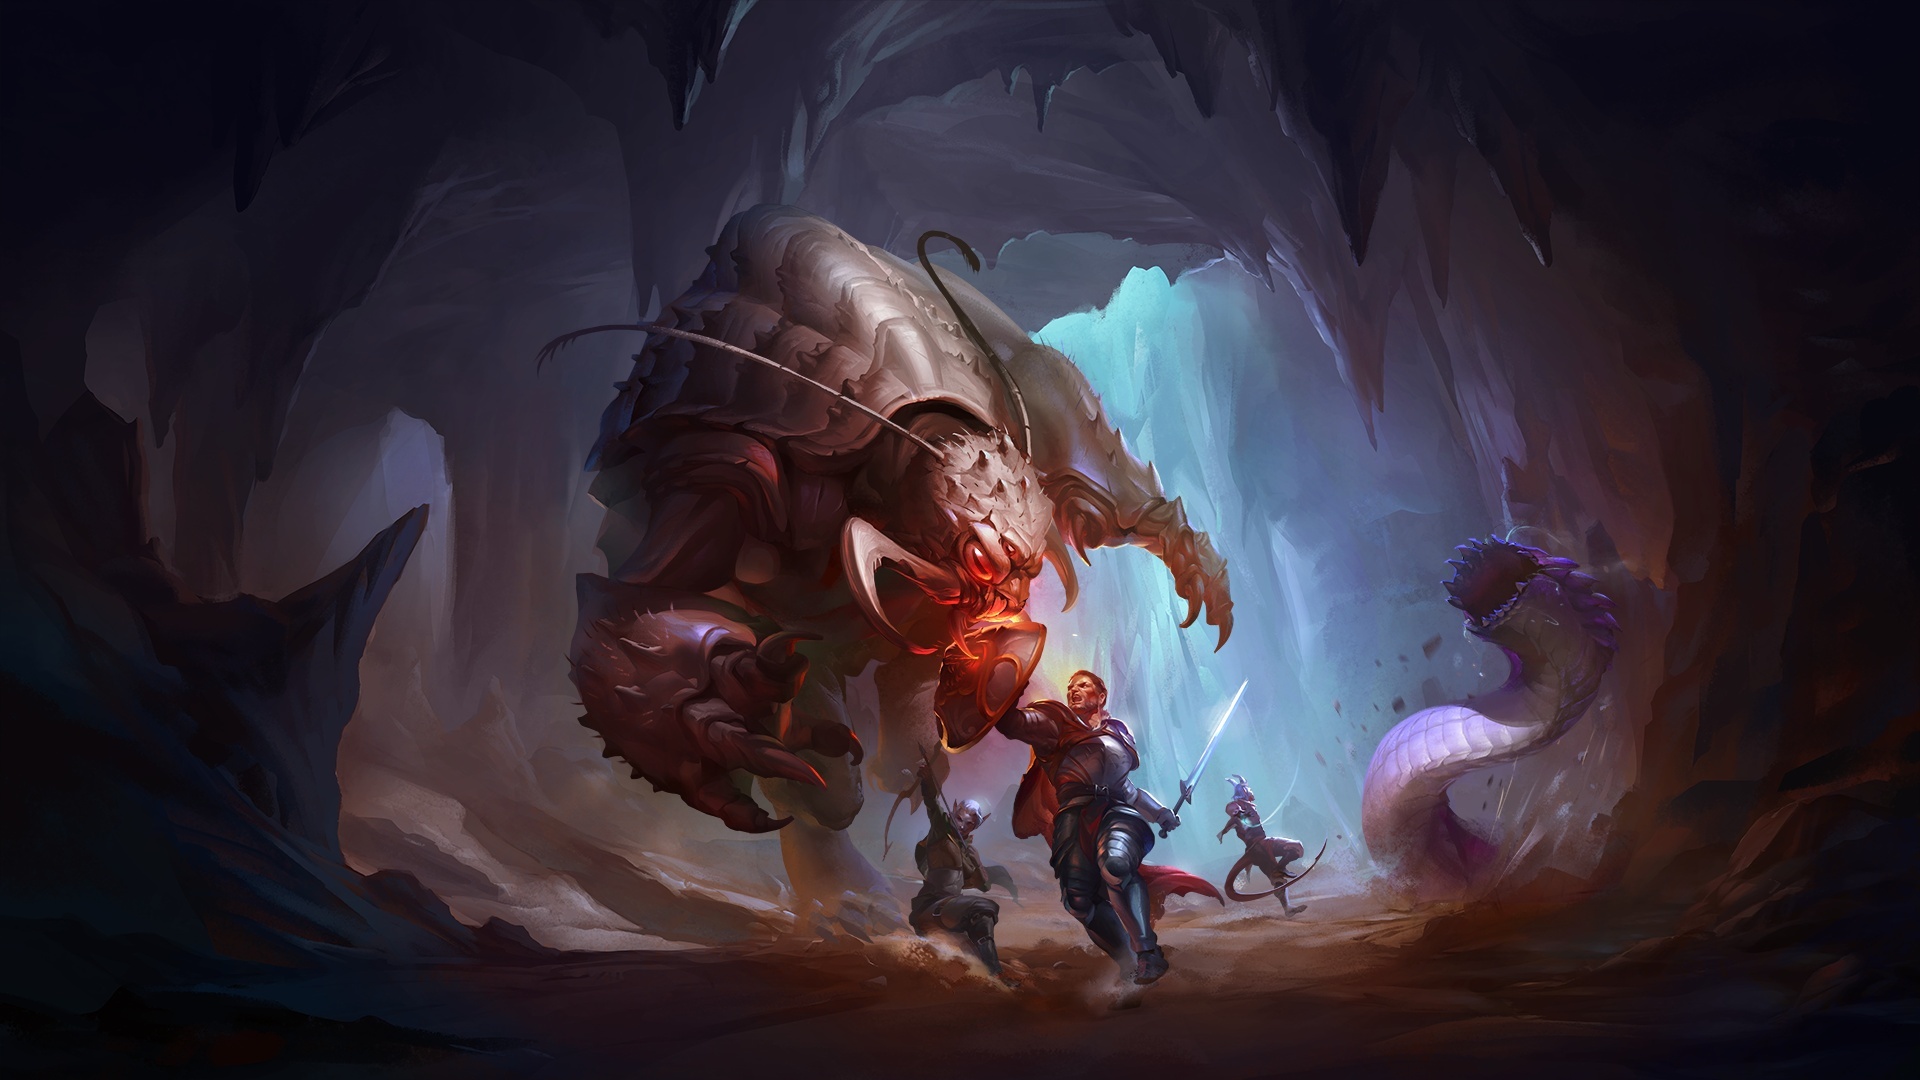 Neverwinter: Undermountain Brings Iconic Dungeons & Dragons Campaign to Life